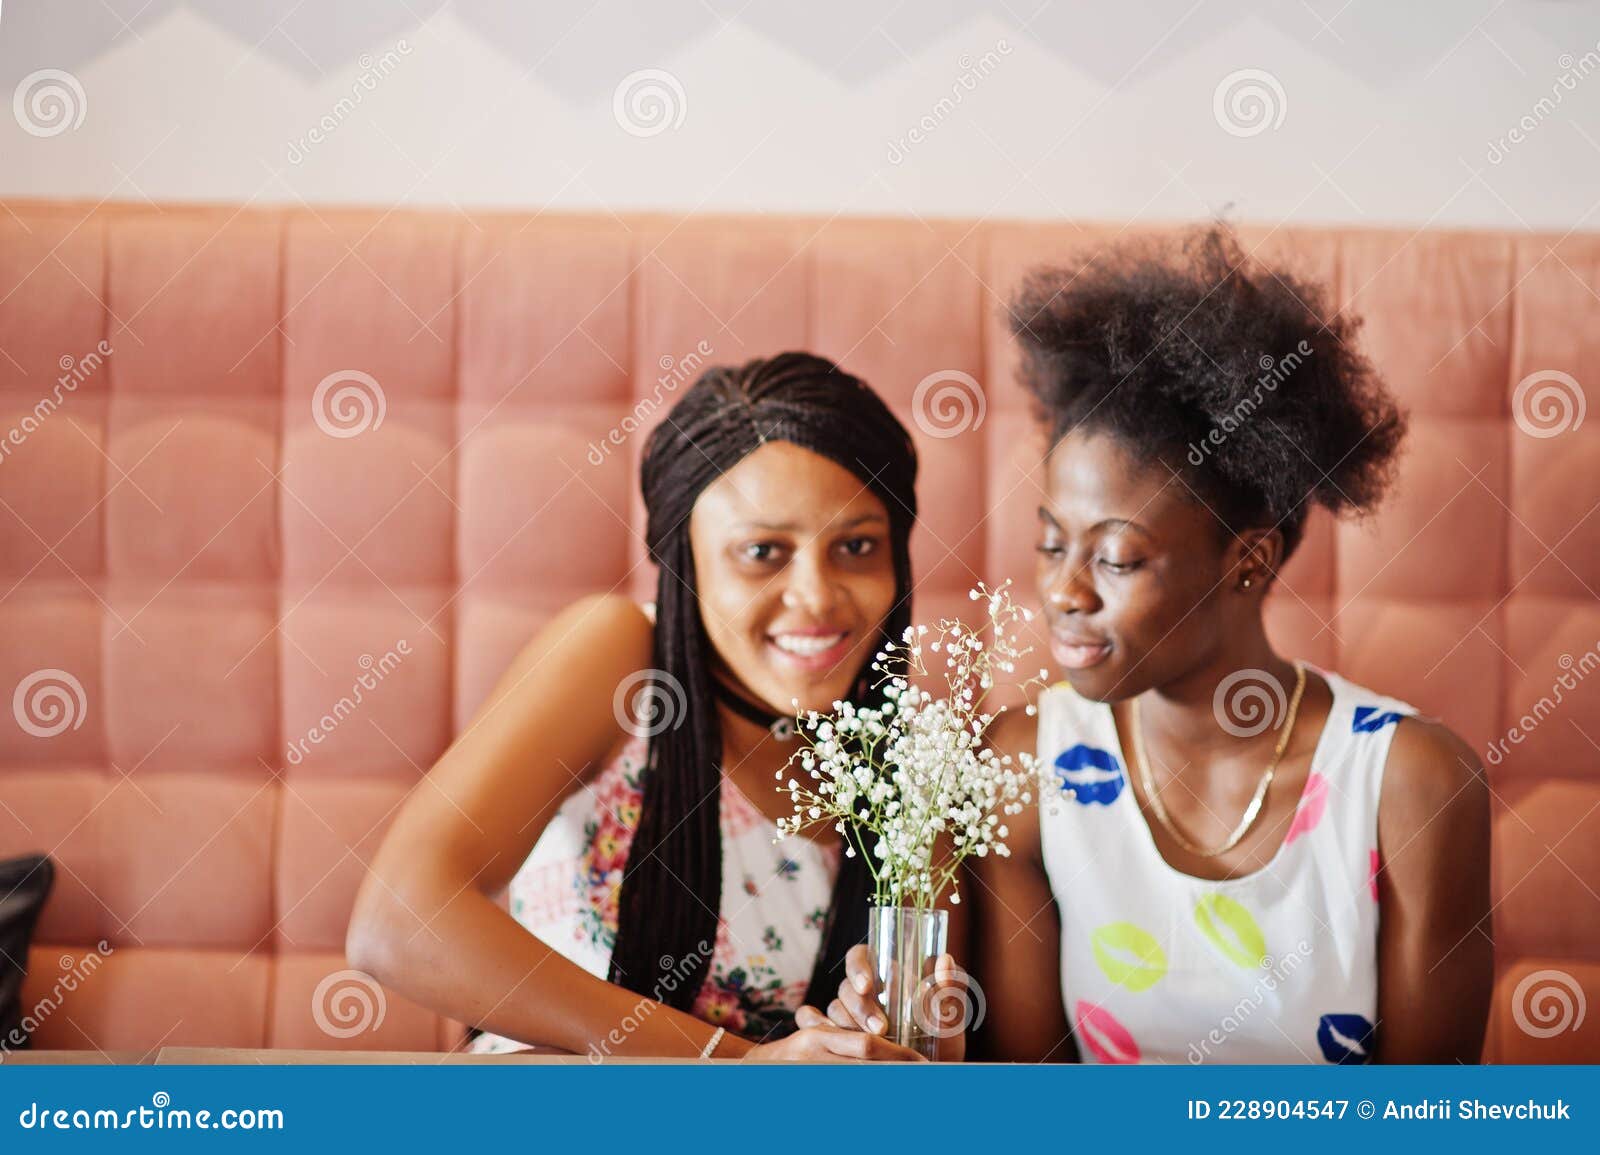 Two Black African Girlfriends at Summer Dresses Posed at Caf image